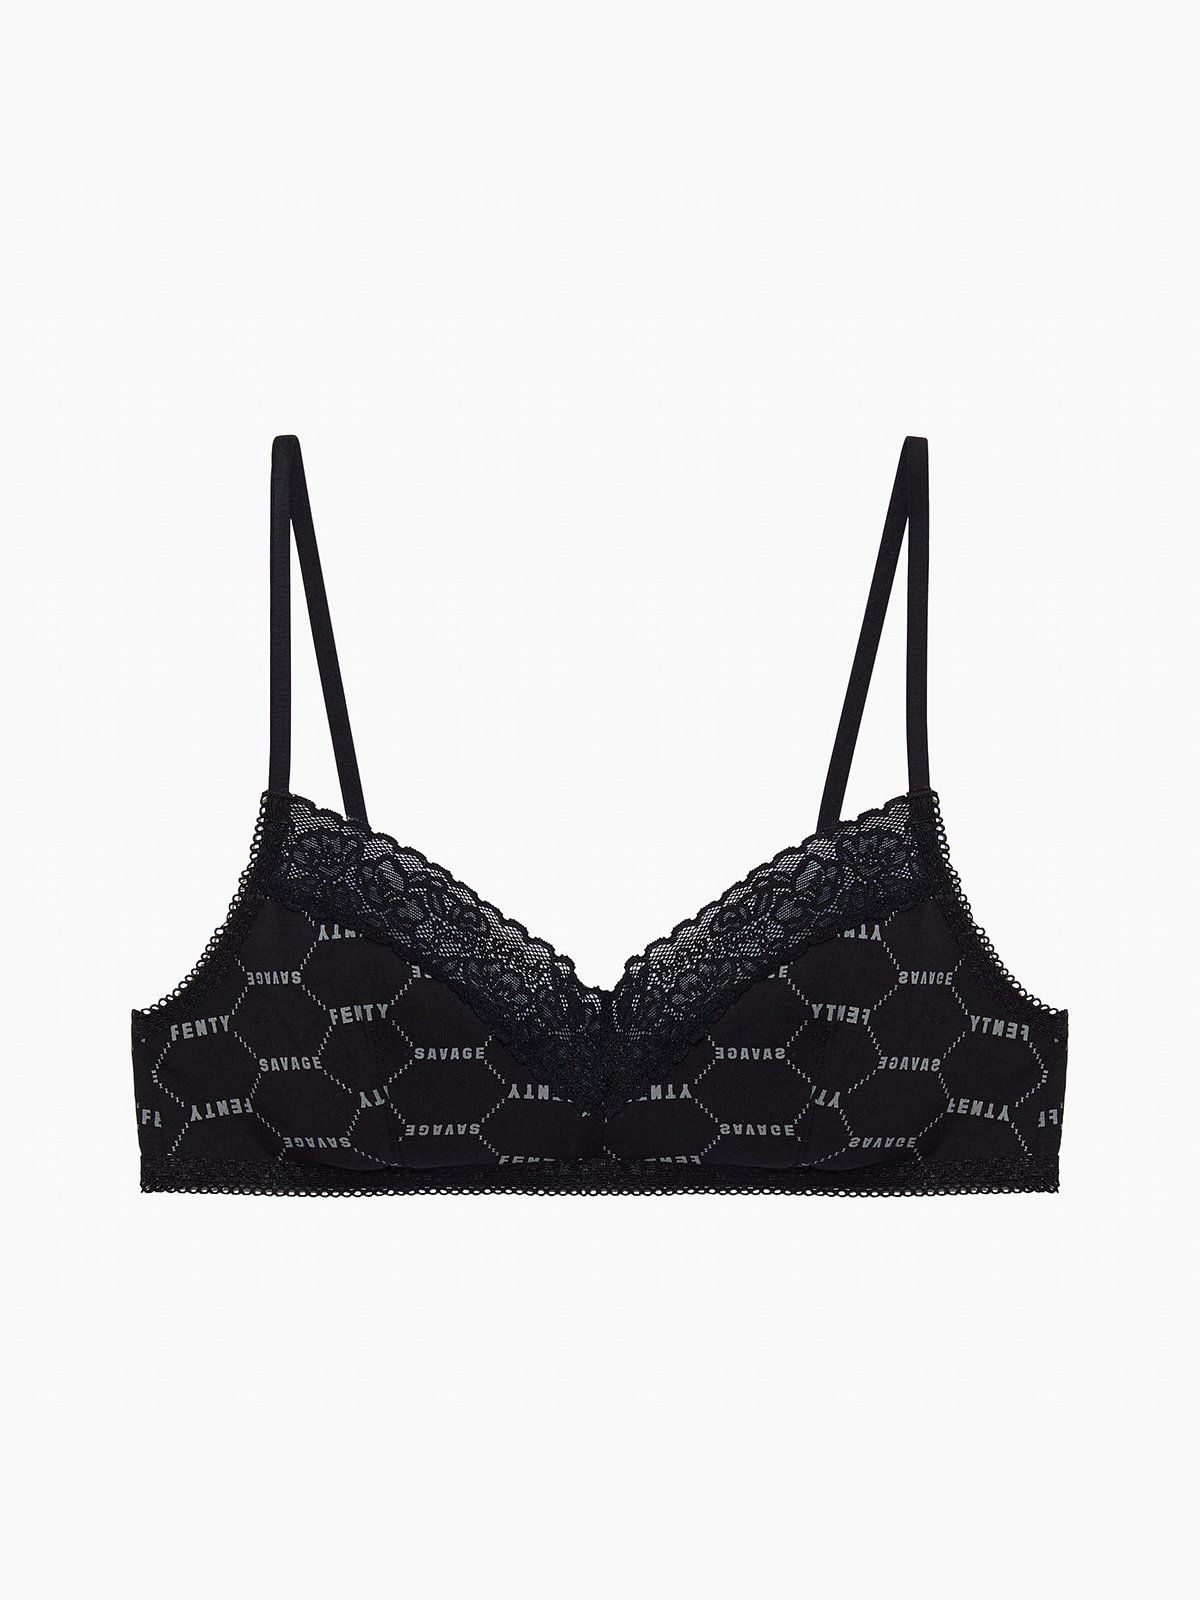 savage x fenty synthetic logo unlined bralette 1X - $45 - From Adrianna